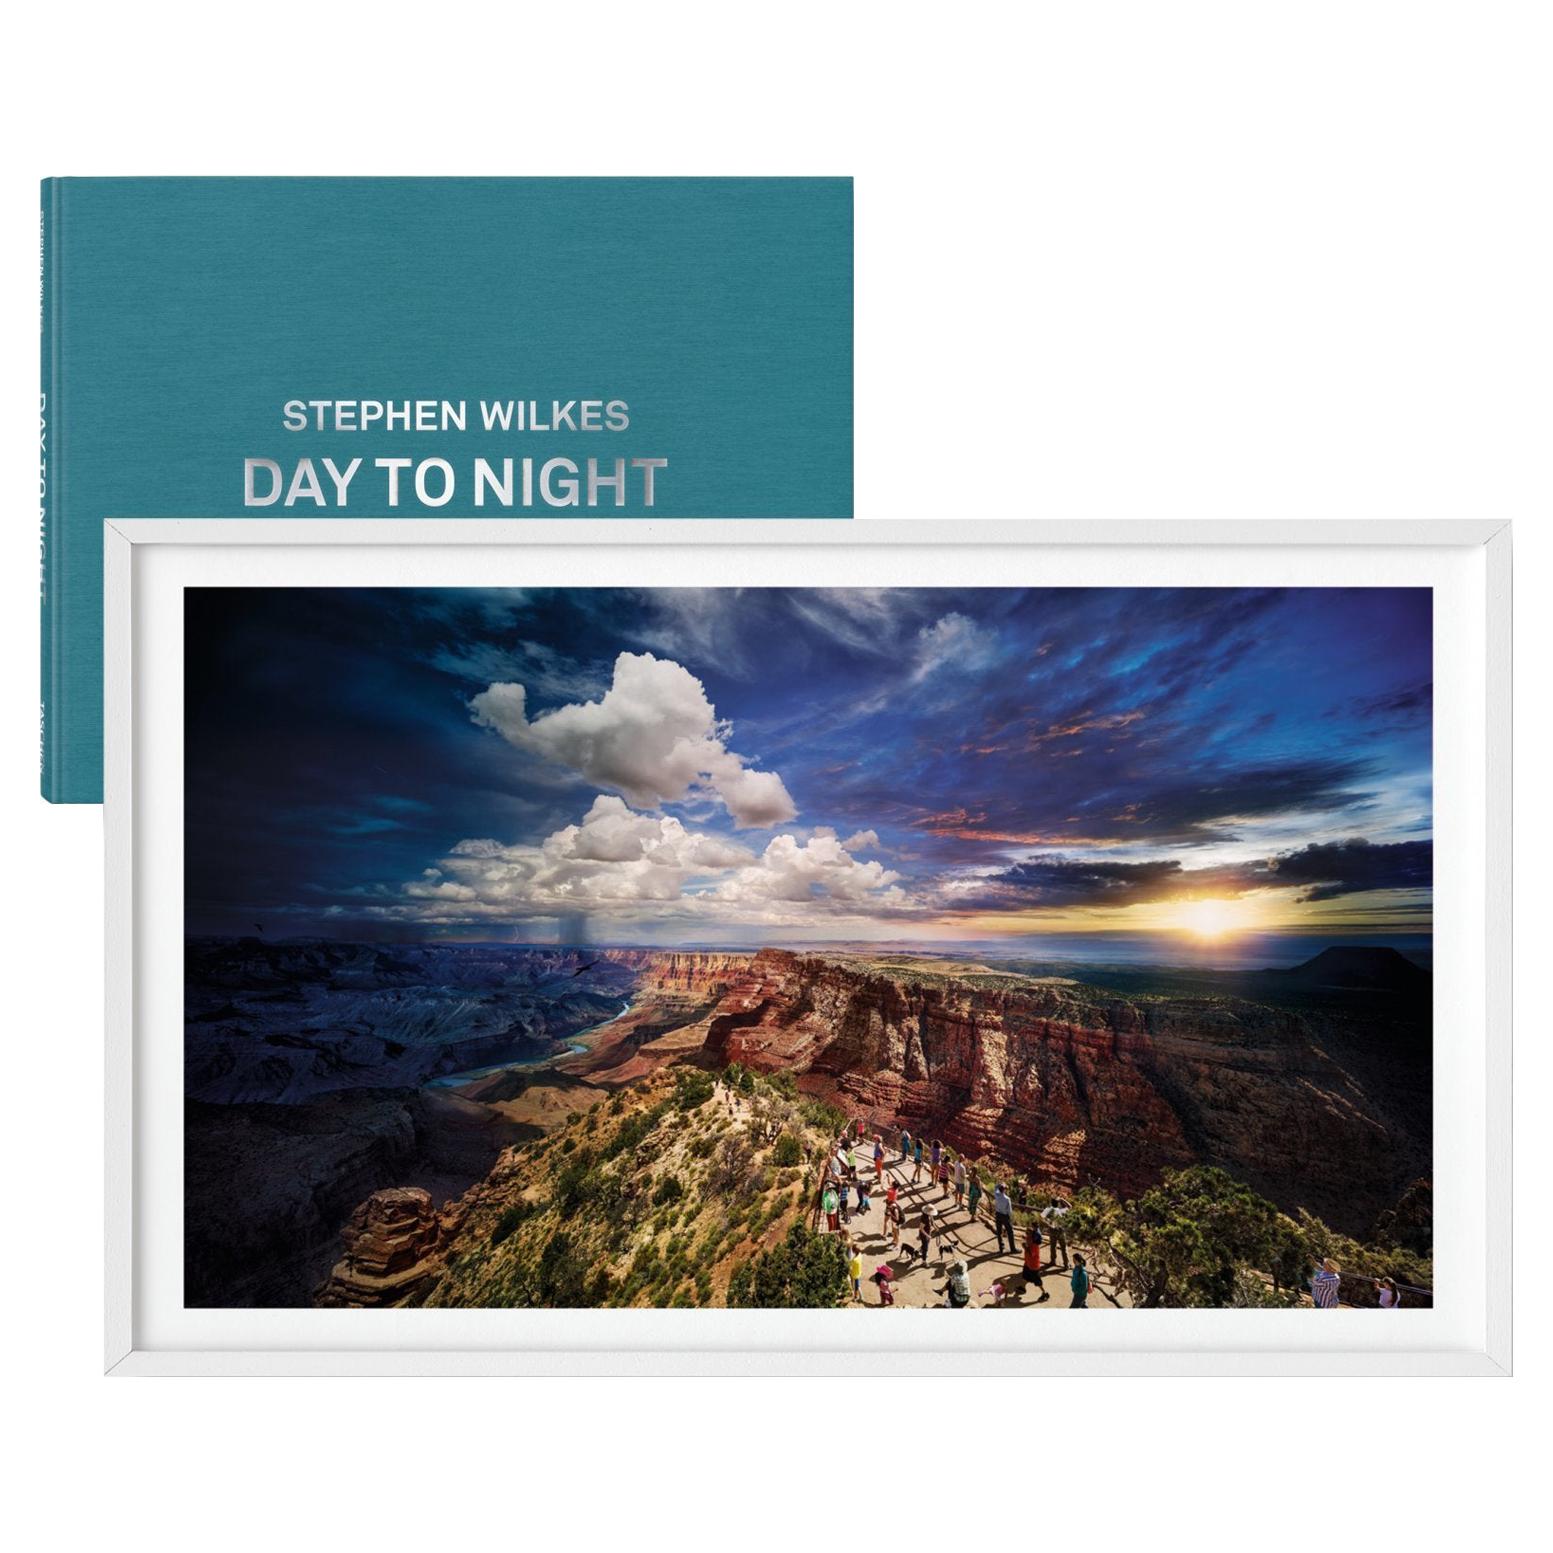 Stephen Wilkes, Day to Night, Art Edition No. 101-200 Grand Canyon, Arizona For Sale